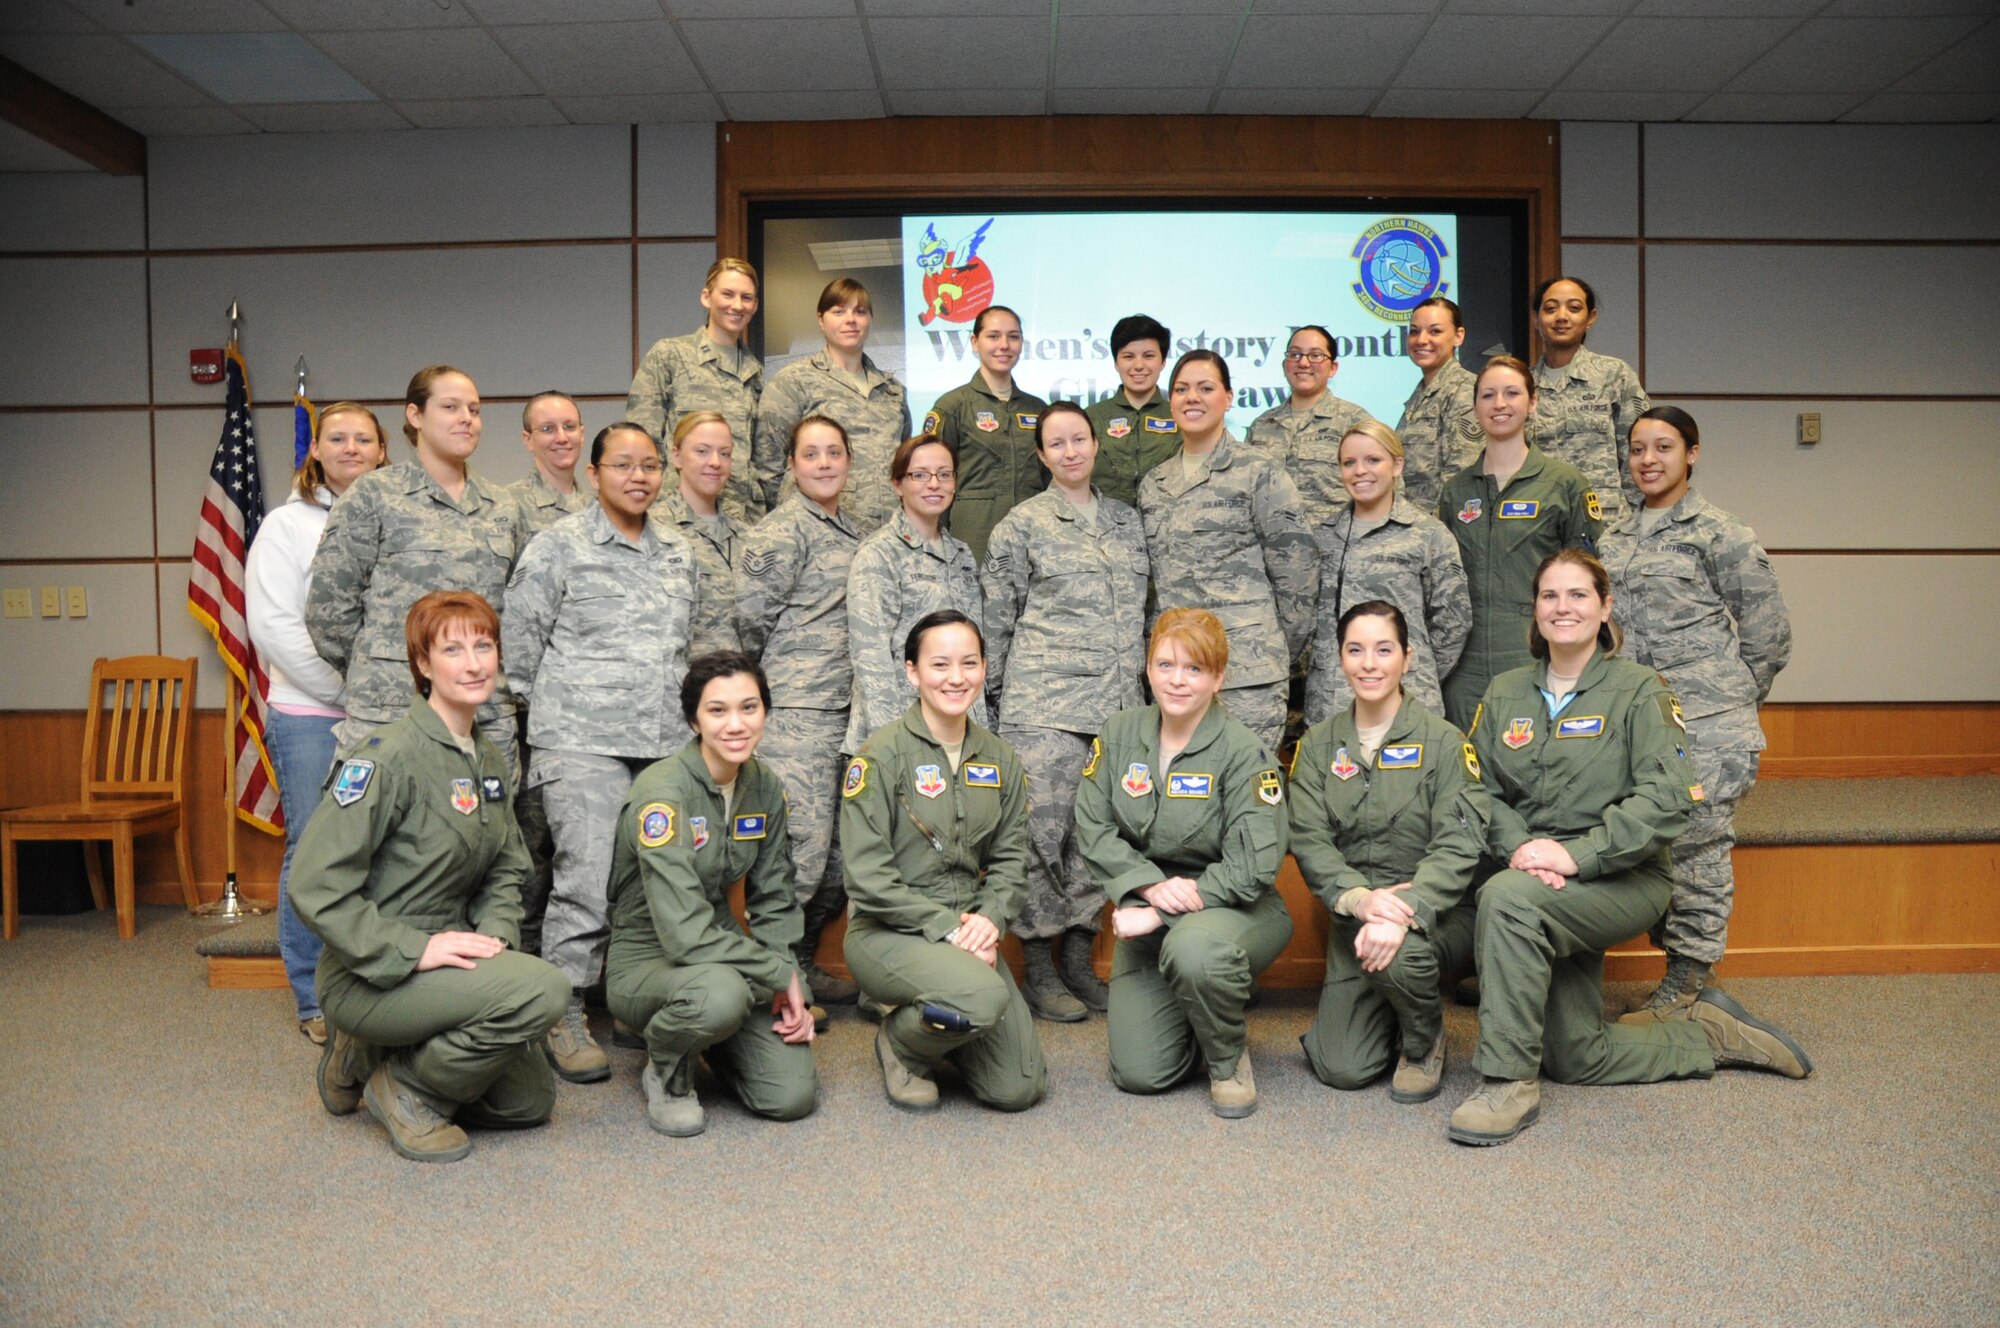 Female members of the 348th Reconnaissance Squadron and 319th Air Base Wing joined forces to set a new record for the longest flight by a military aircraft without air refueling. The record was broken March 29, 2014, with an RQ-4 Global Hawk remaining aloft for 34.3 hours. (U.S. Air Force photo illustration/Staff Sgt. David Dobrydney)